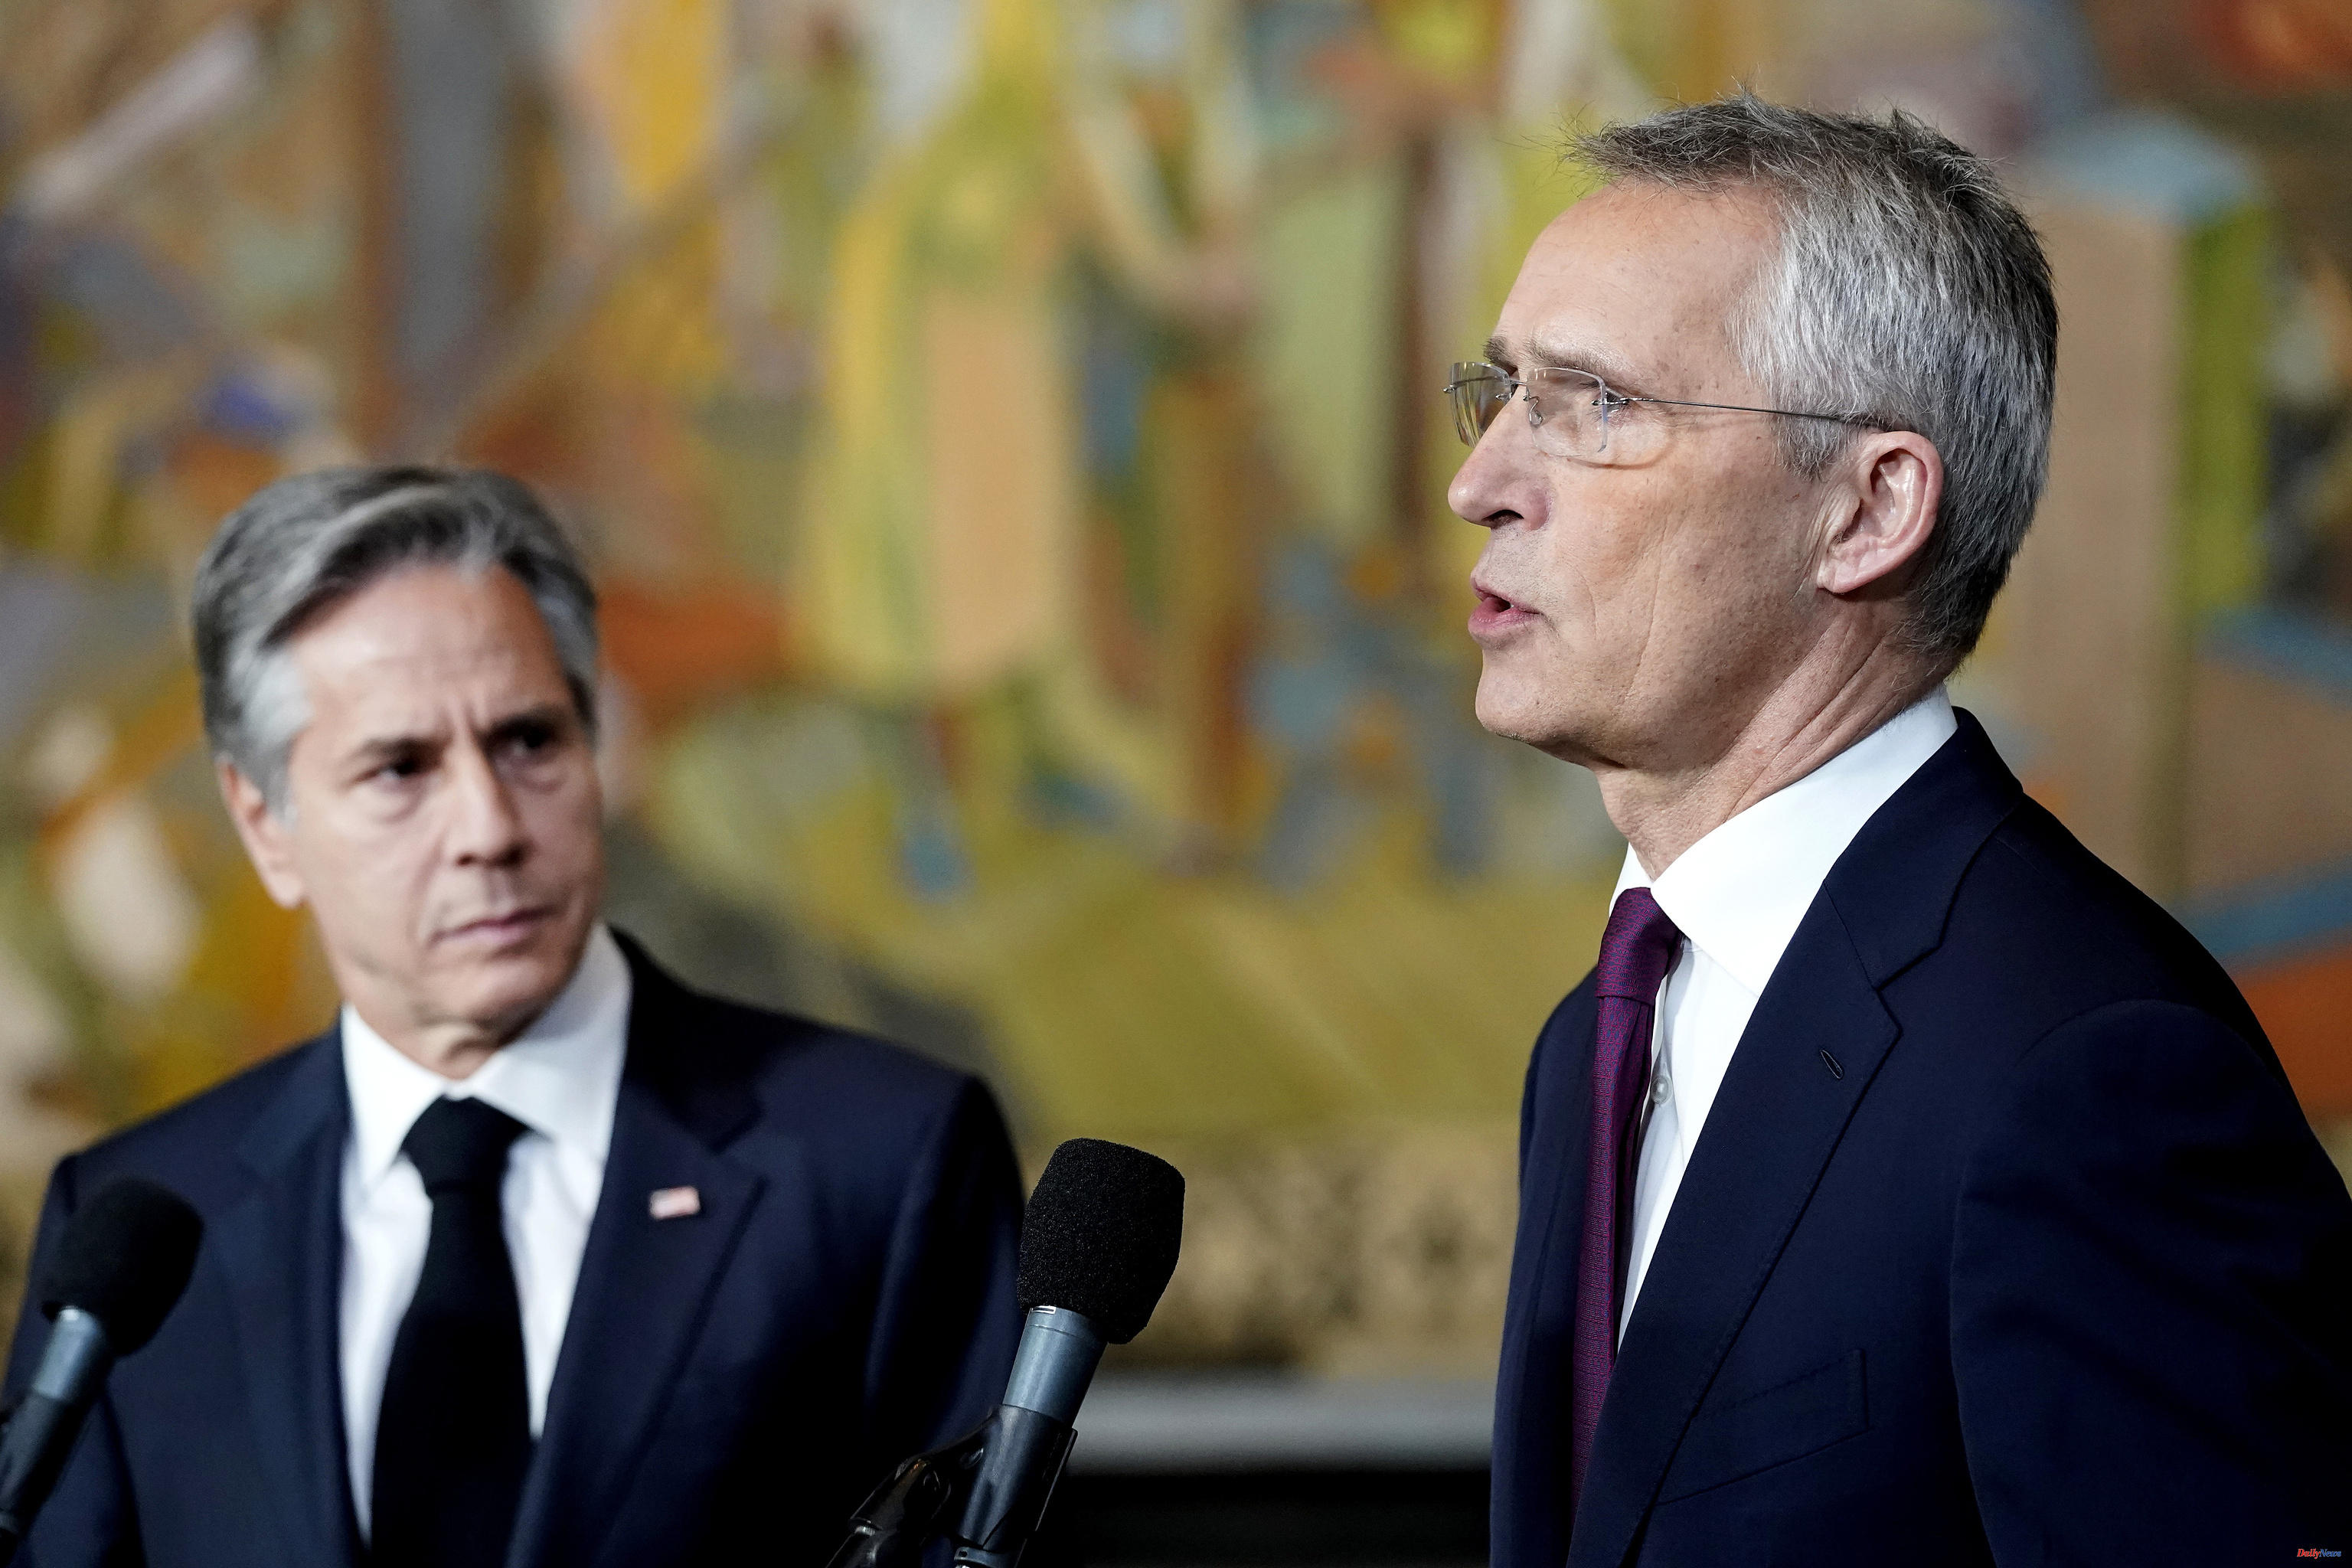 Diplomacy Stoltenberg will travel to Ankara to put pressure on Erdogan and make possible Sweden's accession at the Vilnius summit